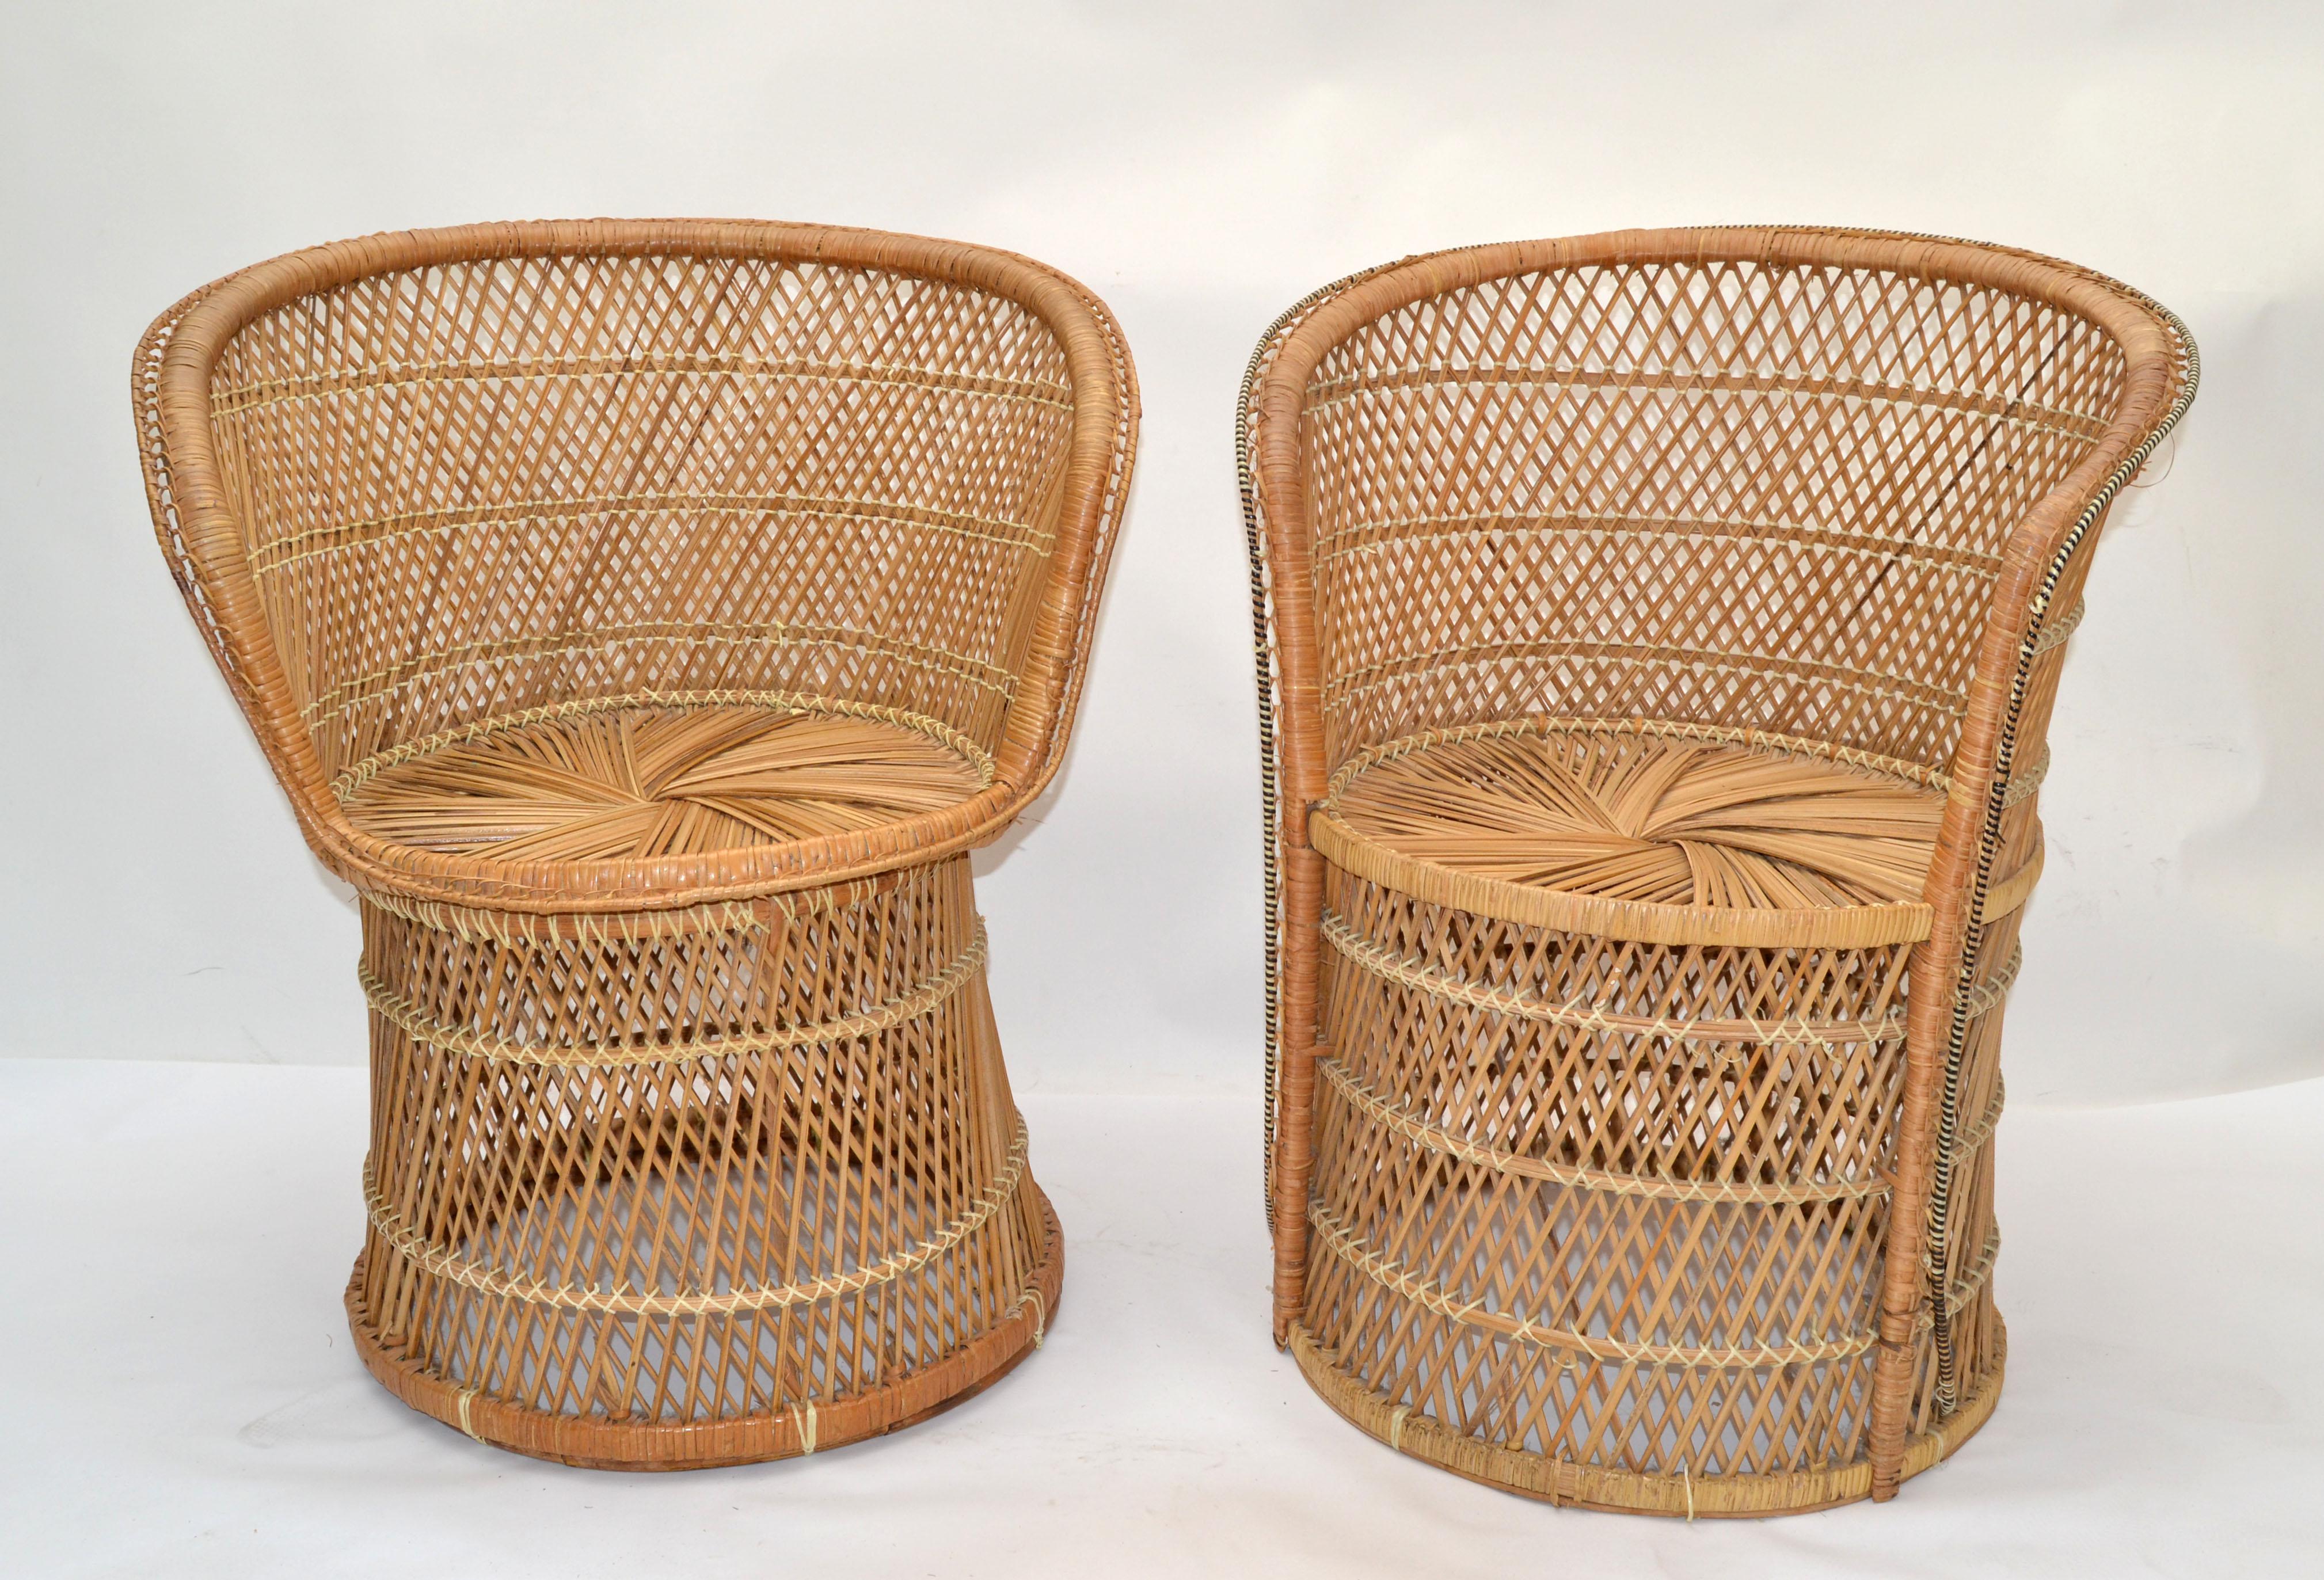 Chinese Export Him & Her Vintage Handwoven & Crafted Chinoiserie Rattan Cane & Bamboo Armchairs For Sale